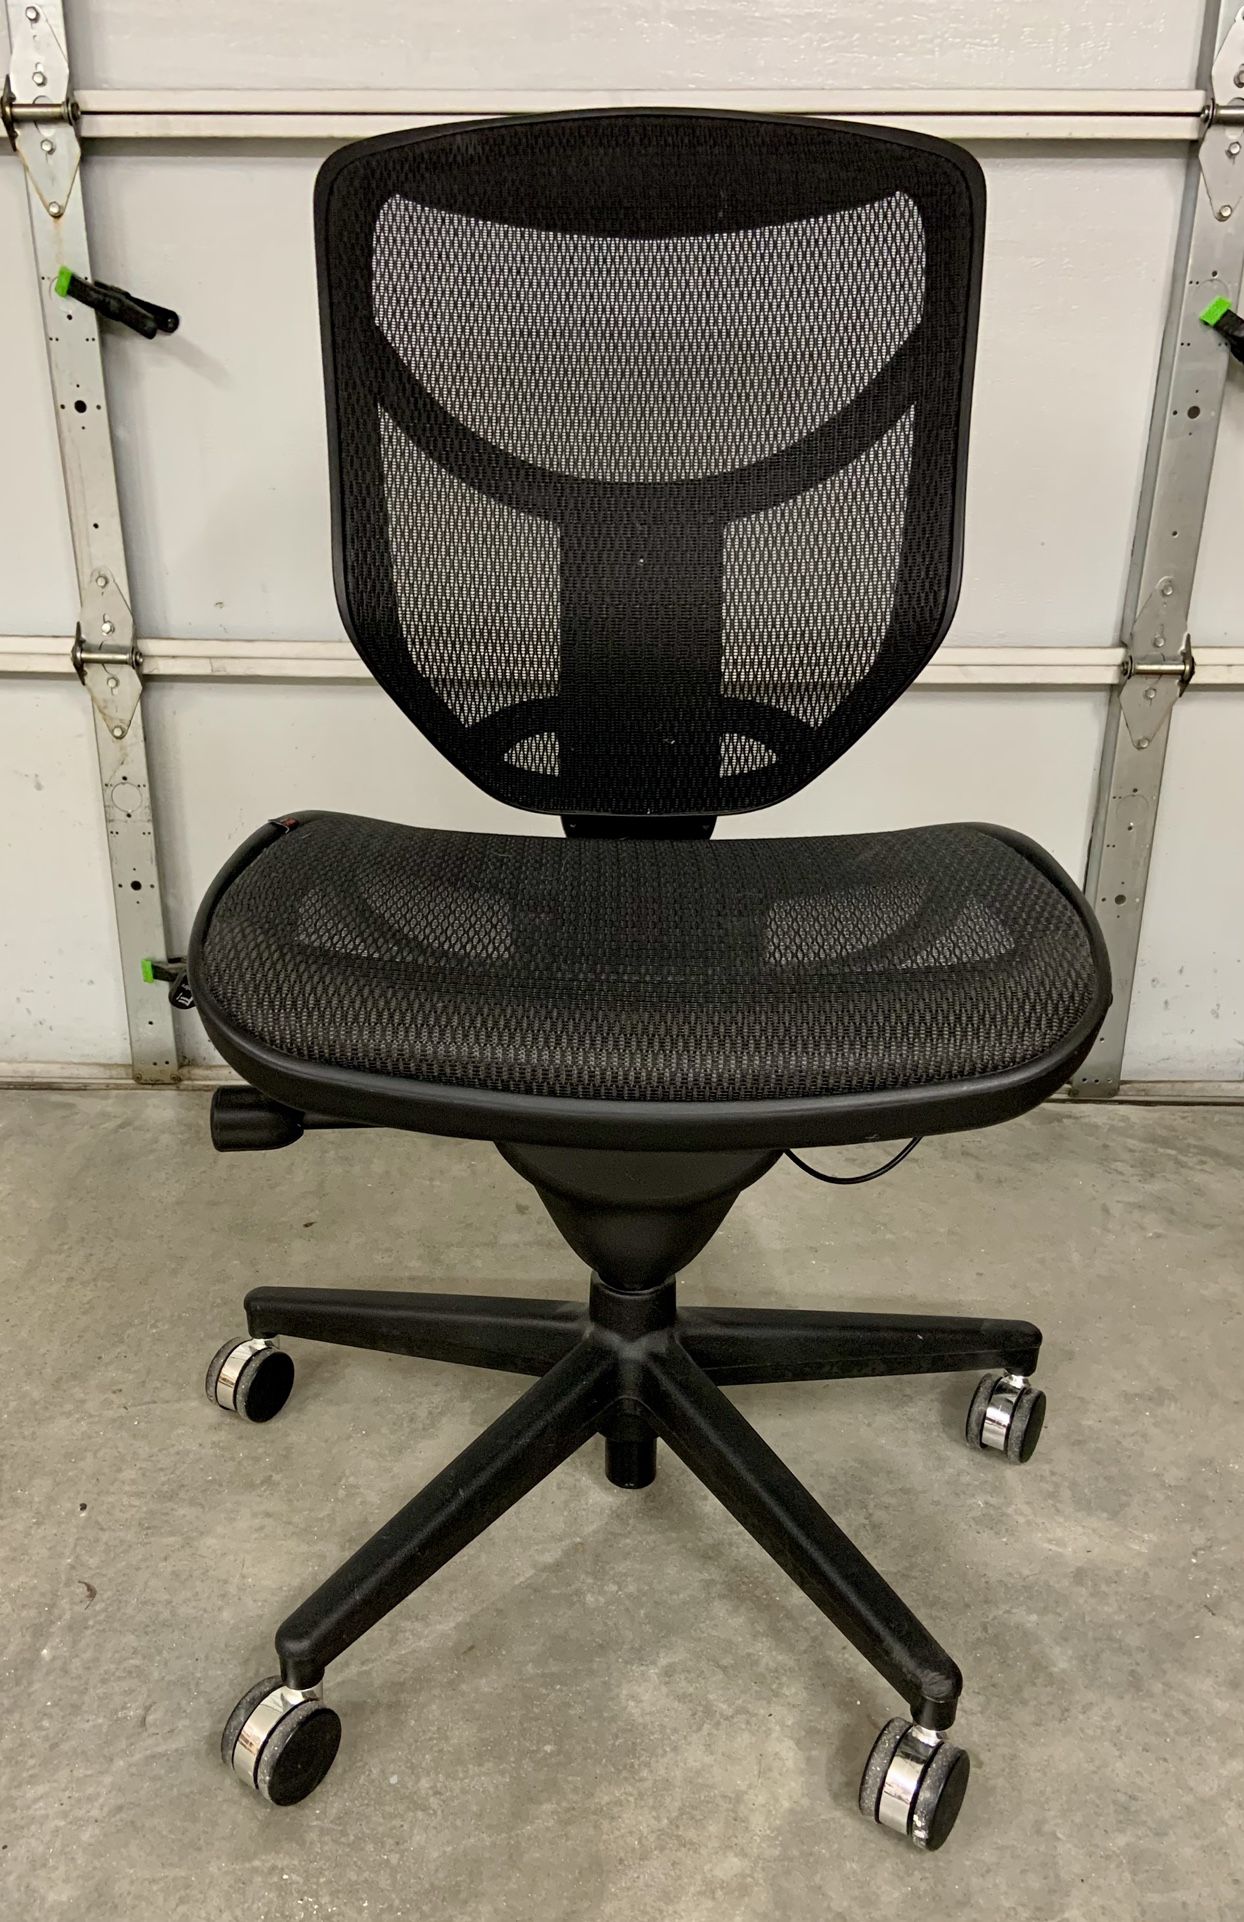 RealSpace Pro (WorkPro) Quantum Ergonomic Office Chair 80% Off Retail Price Like New Condition